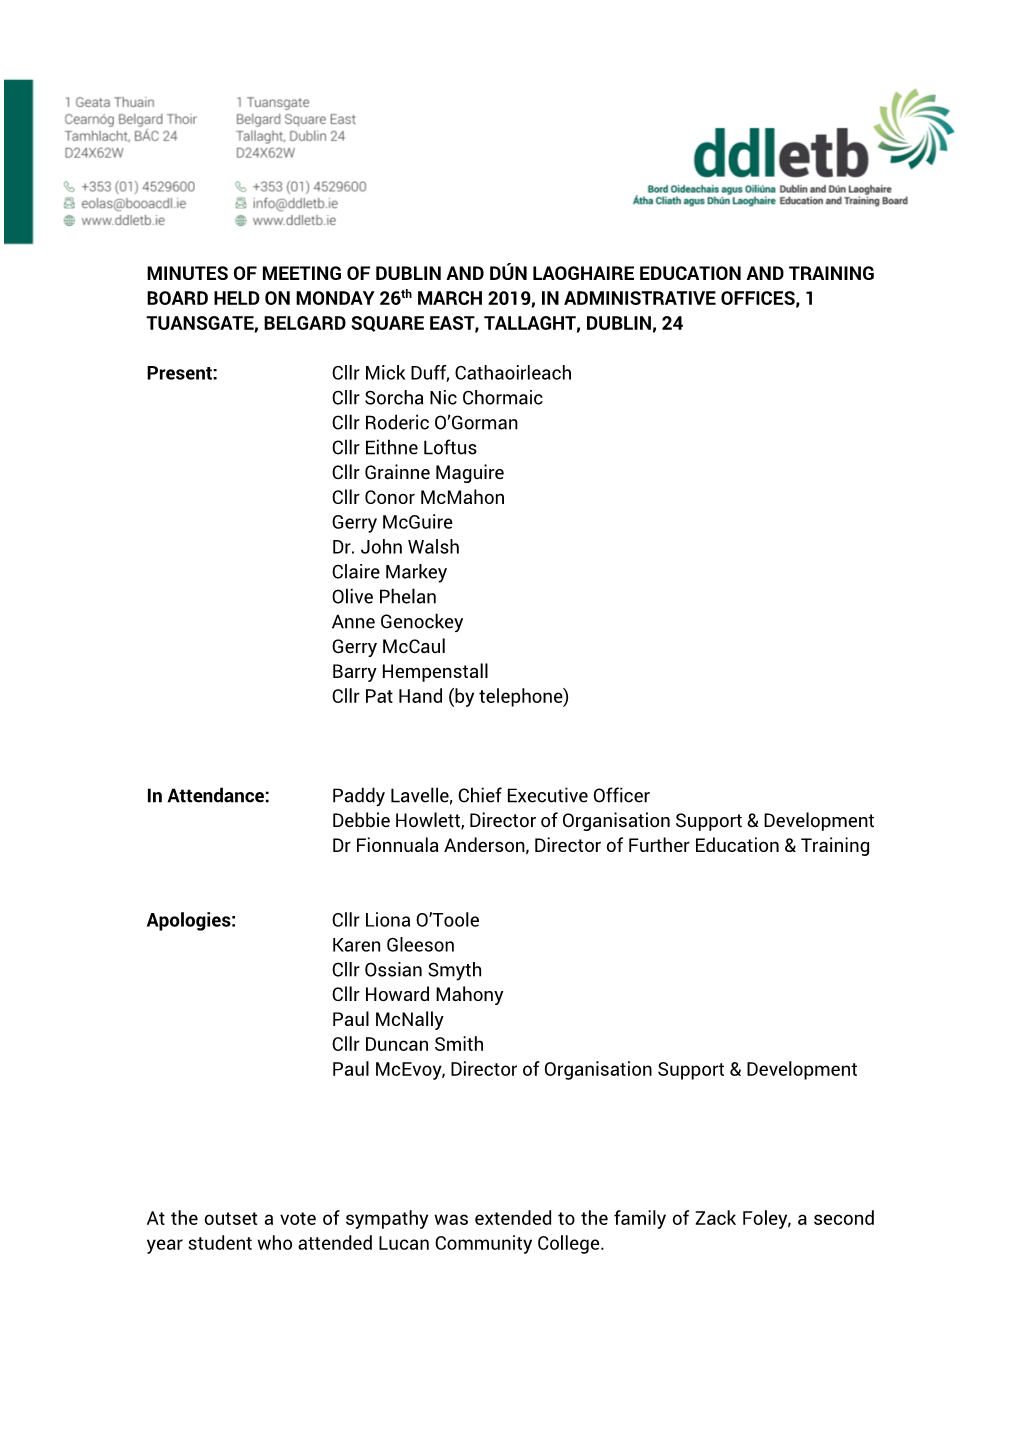 MINUTES of MEETING of DUBLIN and DÚN LAOGHAIRE EDUCATION and TRAINING BOARD HELD on MONDAY 26Th MARCH 2019, in ADMINISTRATIVE O